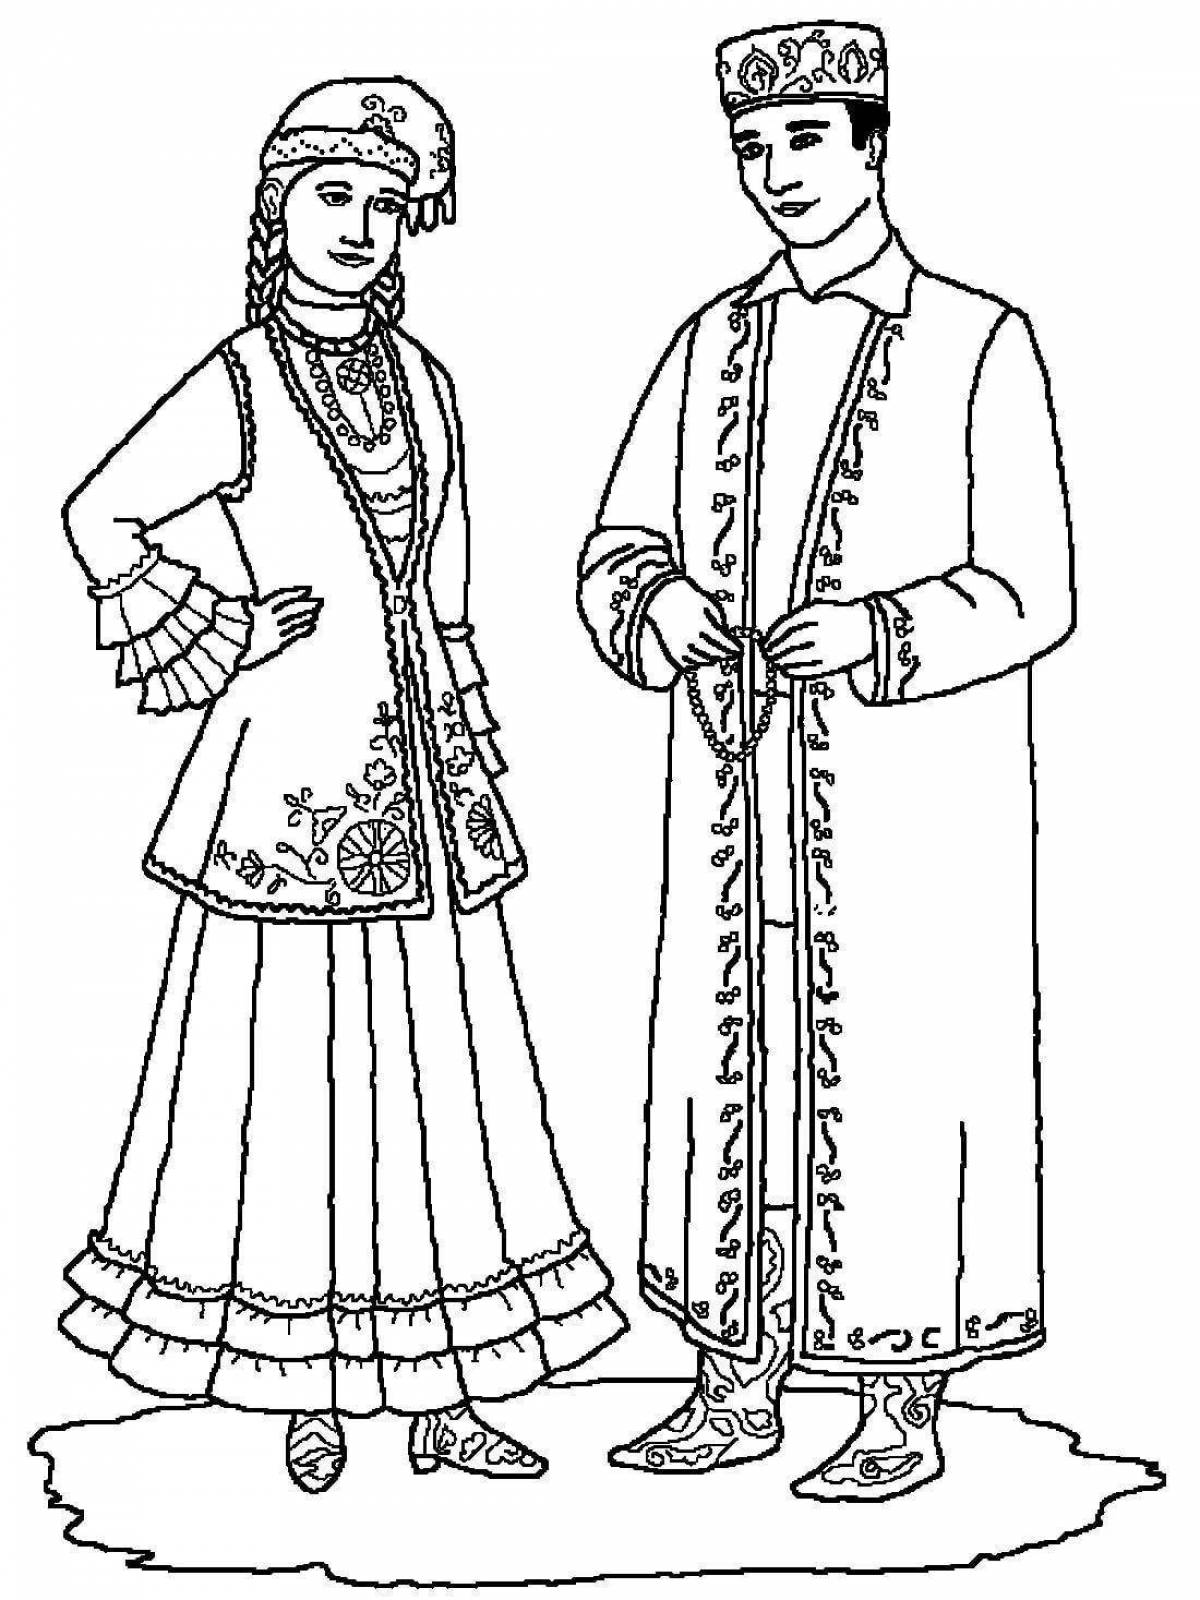 Coloring page richly decorated Udmurt national costume